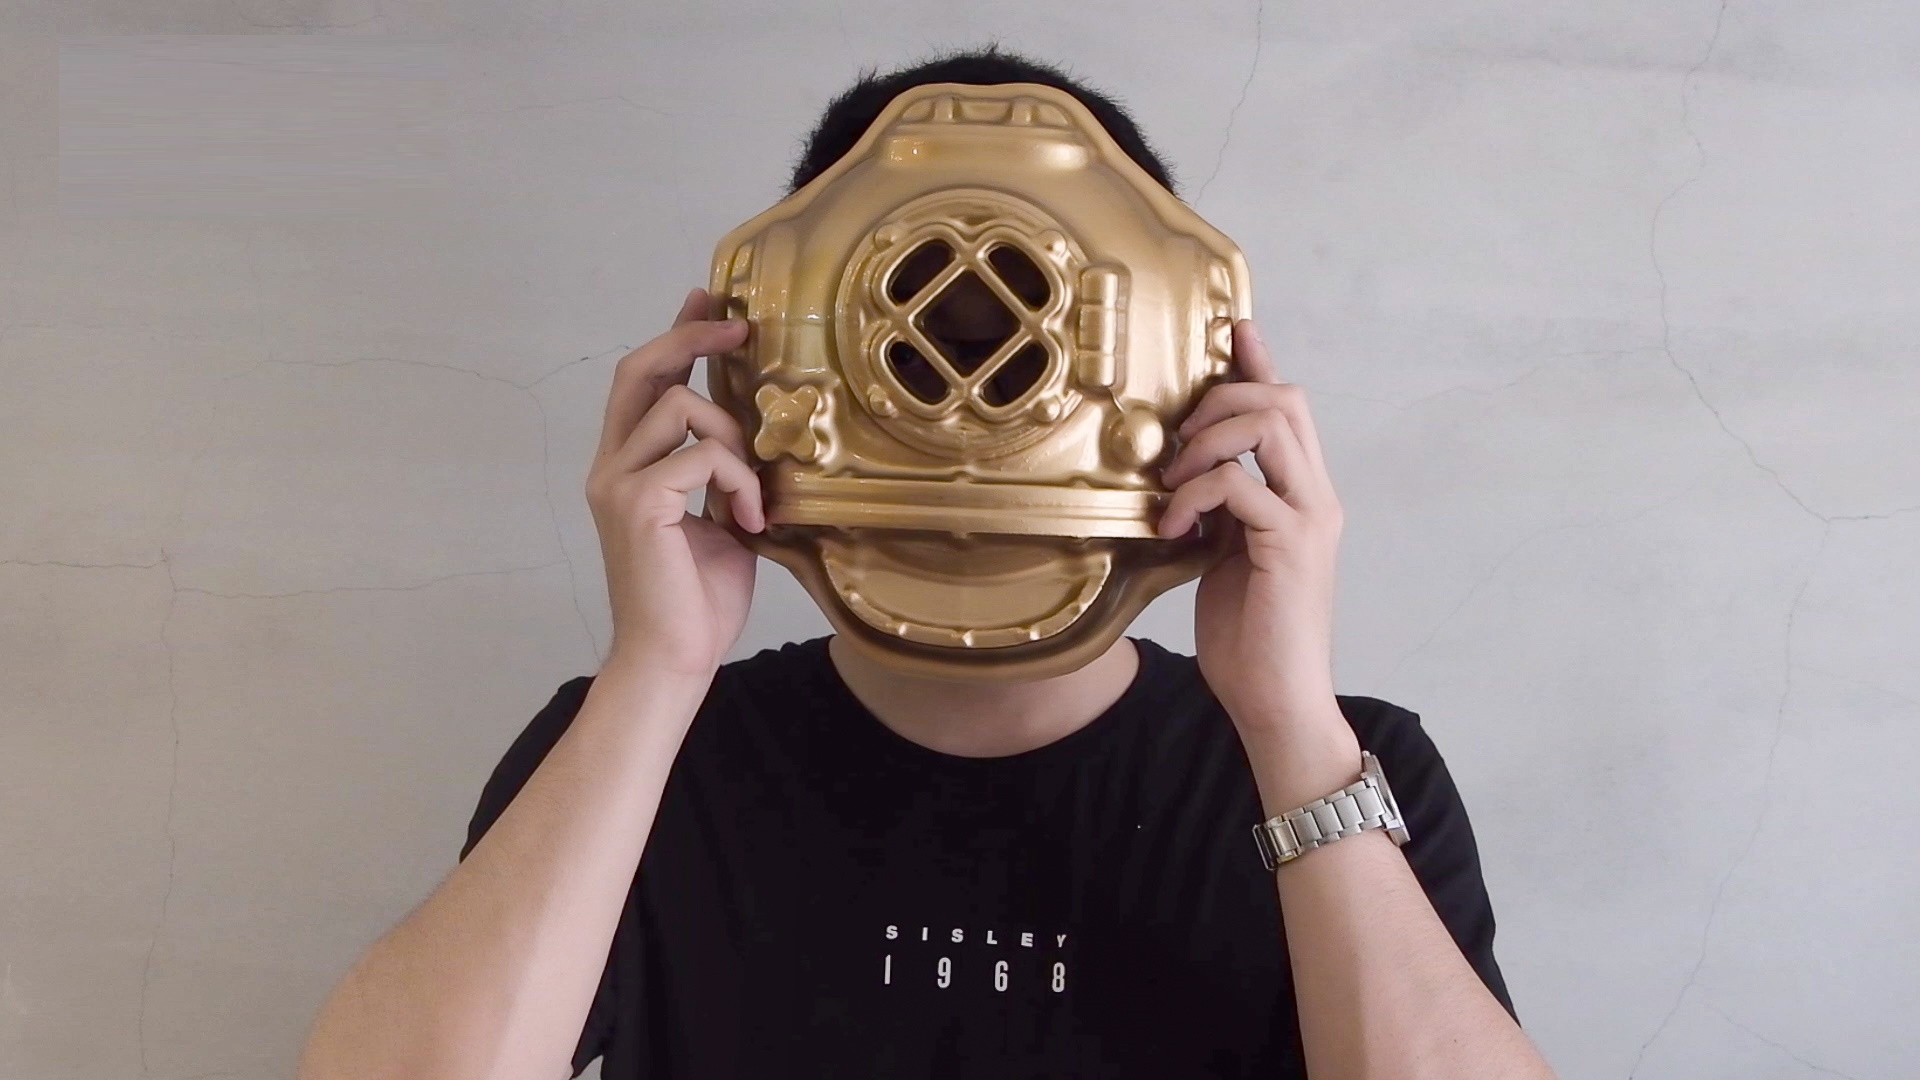 Geez Design Studio made a diving helmet mask with a vacuum former